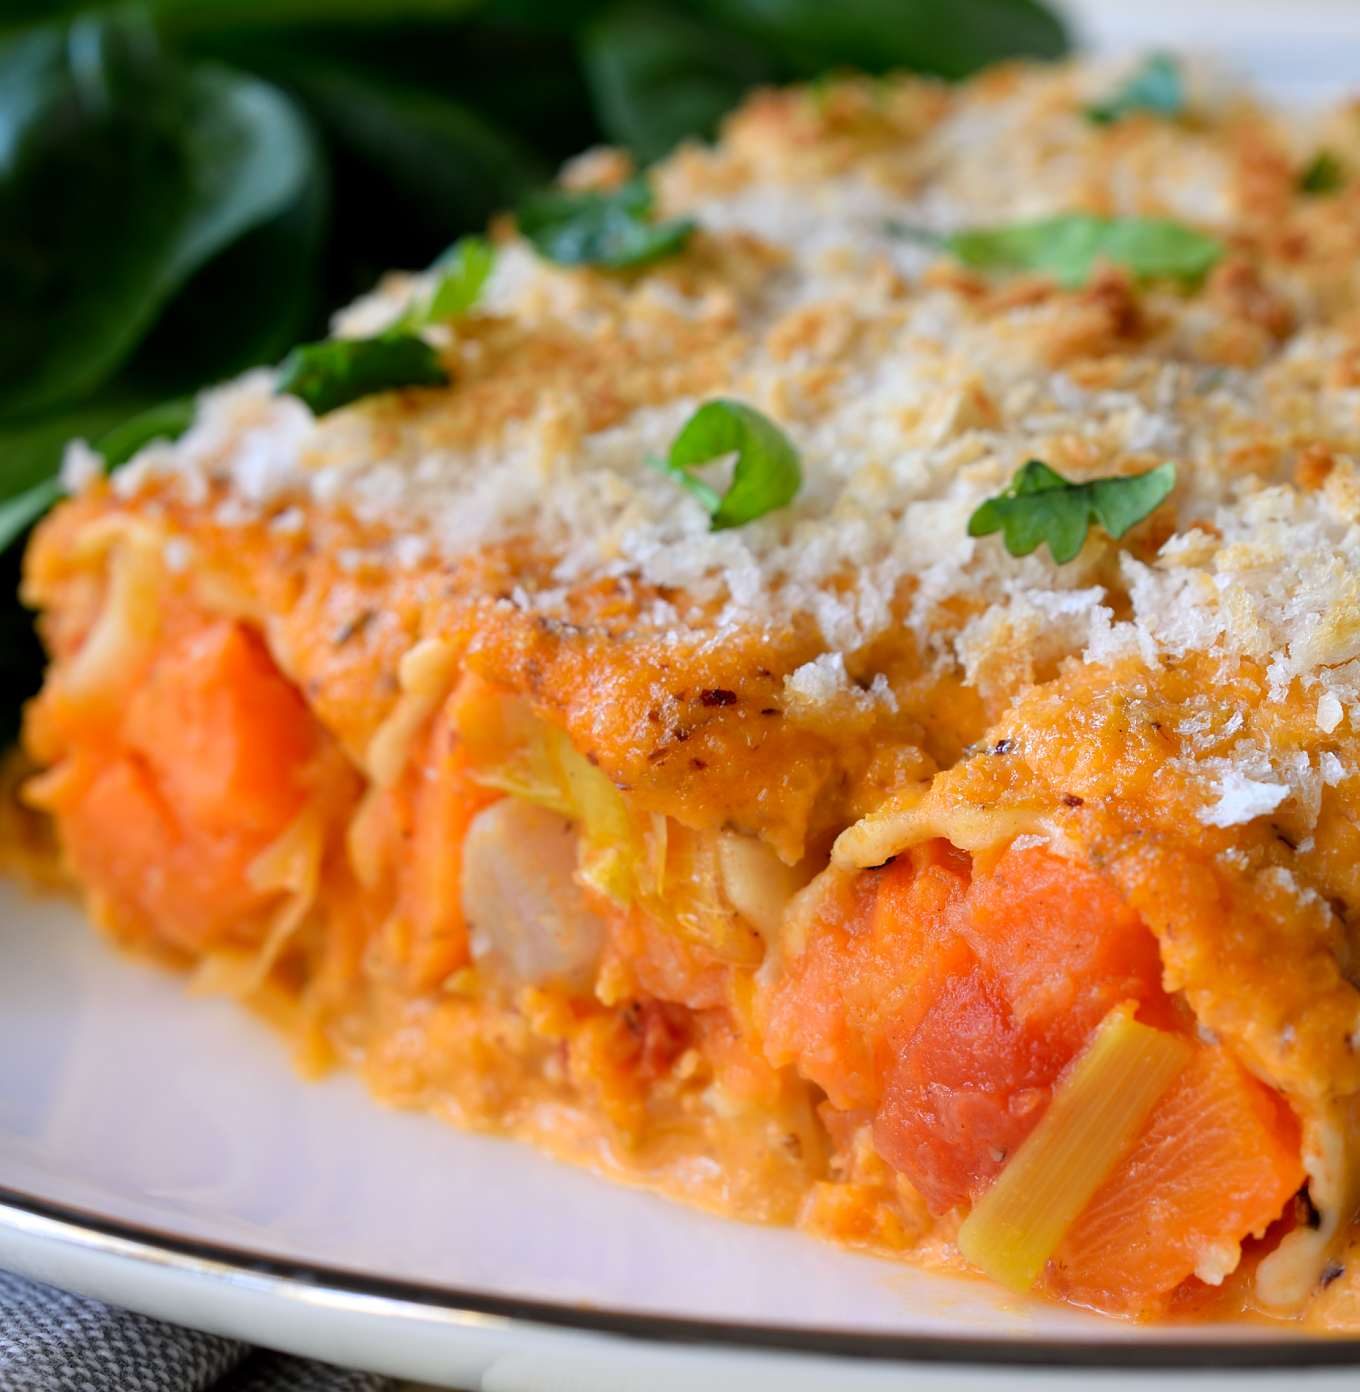 This vegan cannelloni recipe is a delicious soy-free dish to warm you up on a chilly evening. Roasted root vegetables are stuffed inside pasta tubes, smothered in a homemade romesco sauce and sprinkled with breadcrumbs for a crispy crust. This elegant dish uses the best of winter’s seasonal vegetables and makes a great vegan holiday dish.